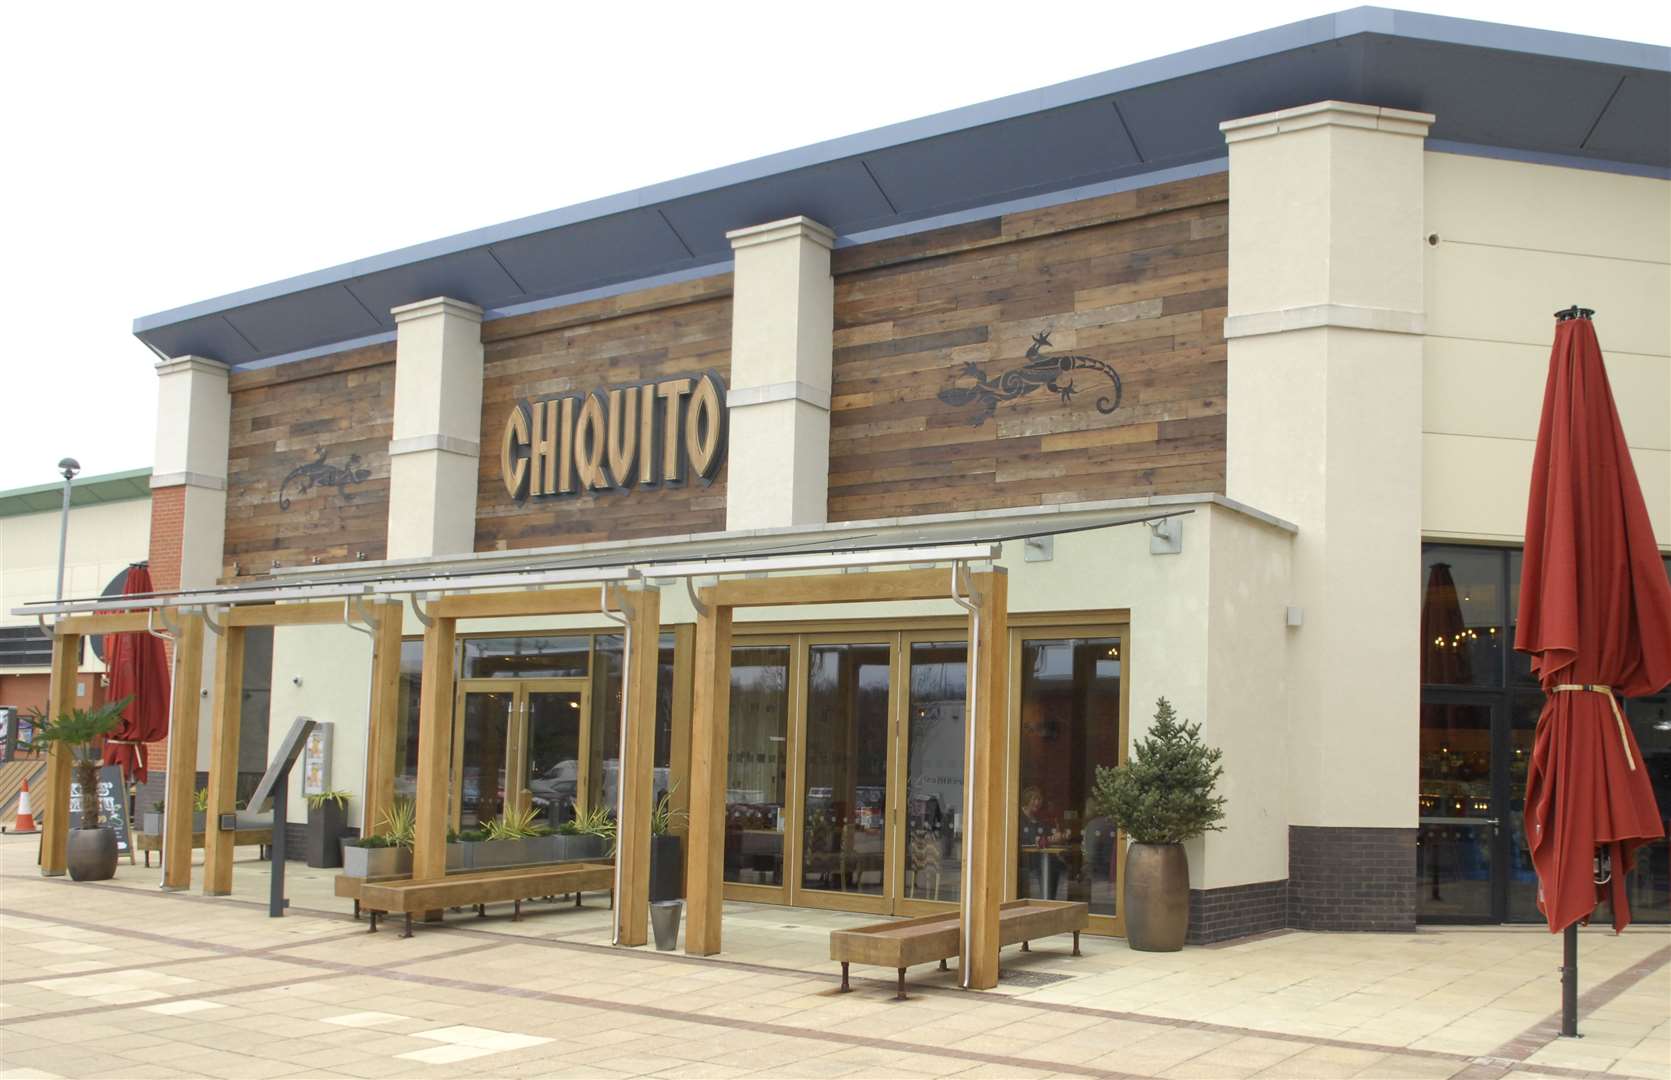 Chiquito in Ashford could be at risk